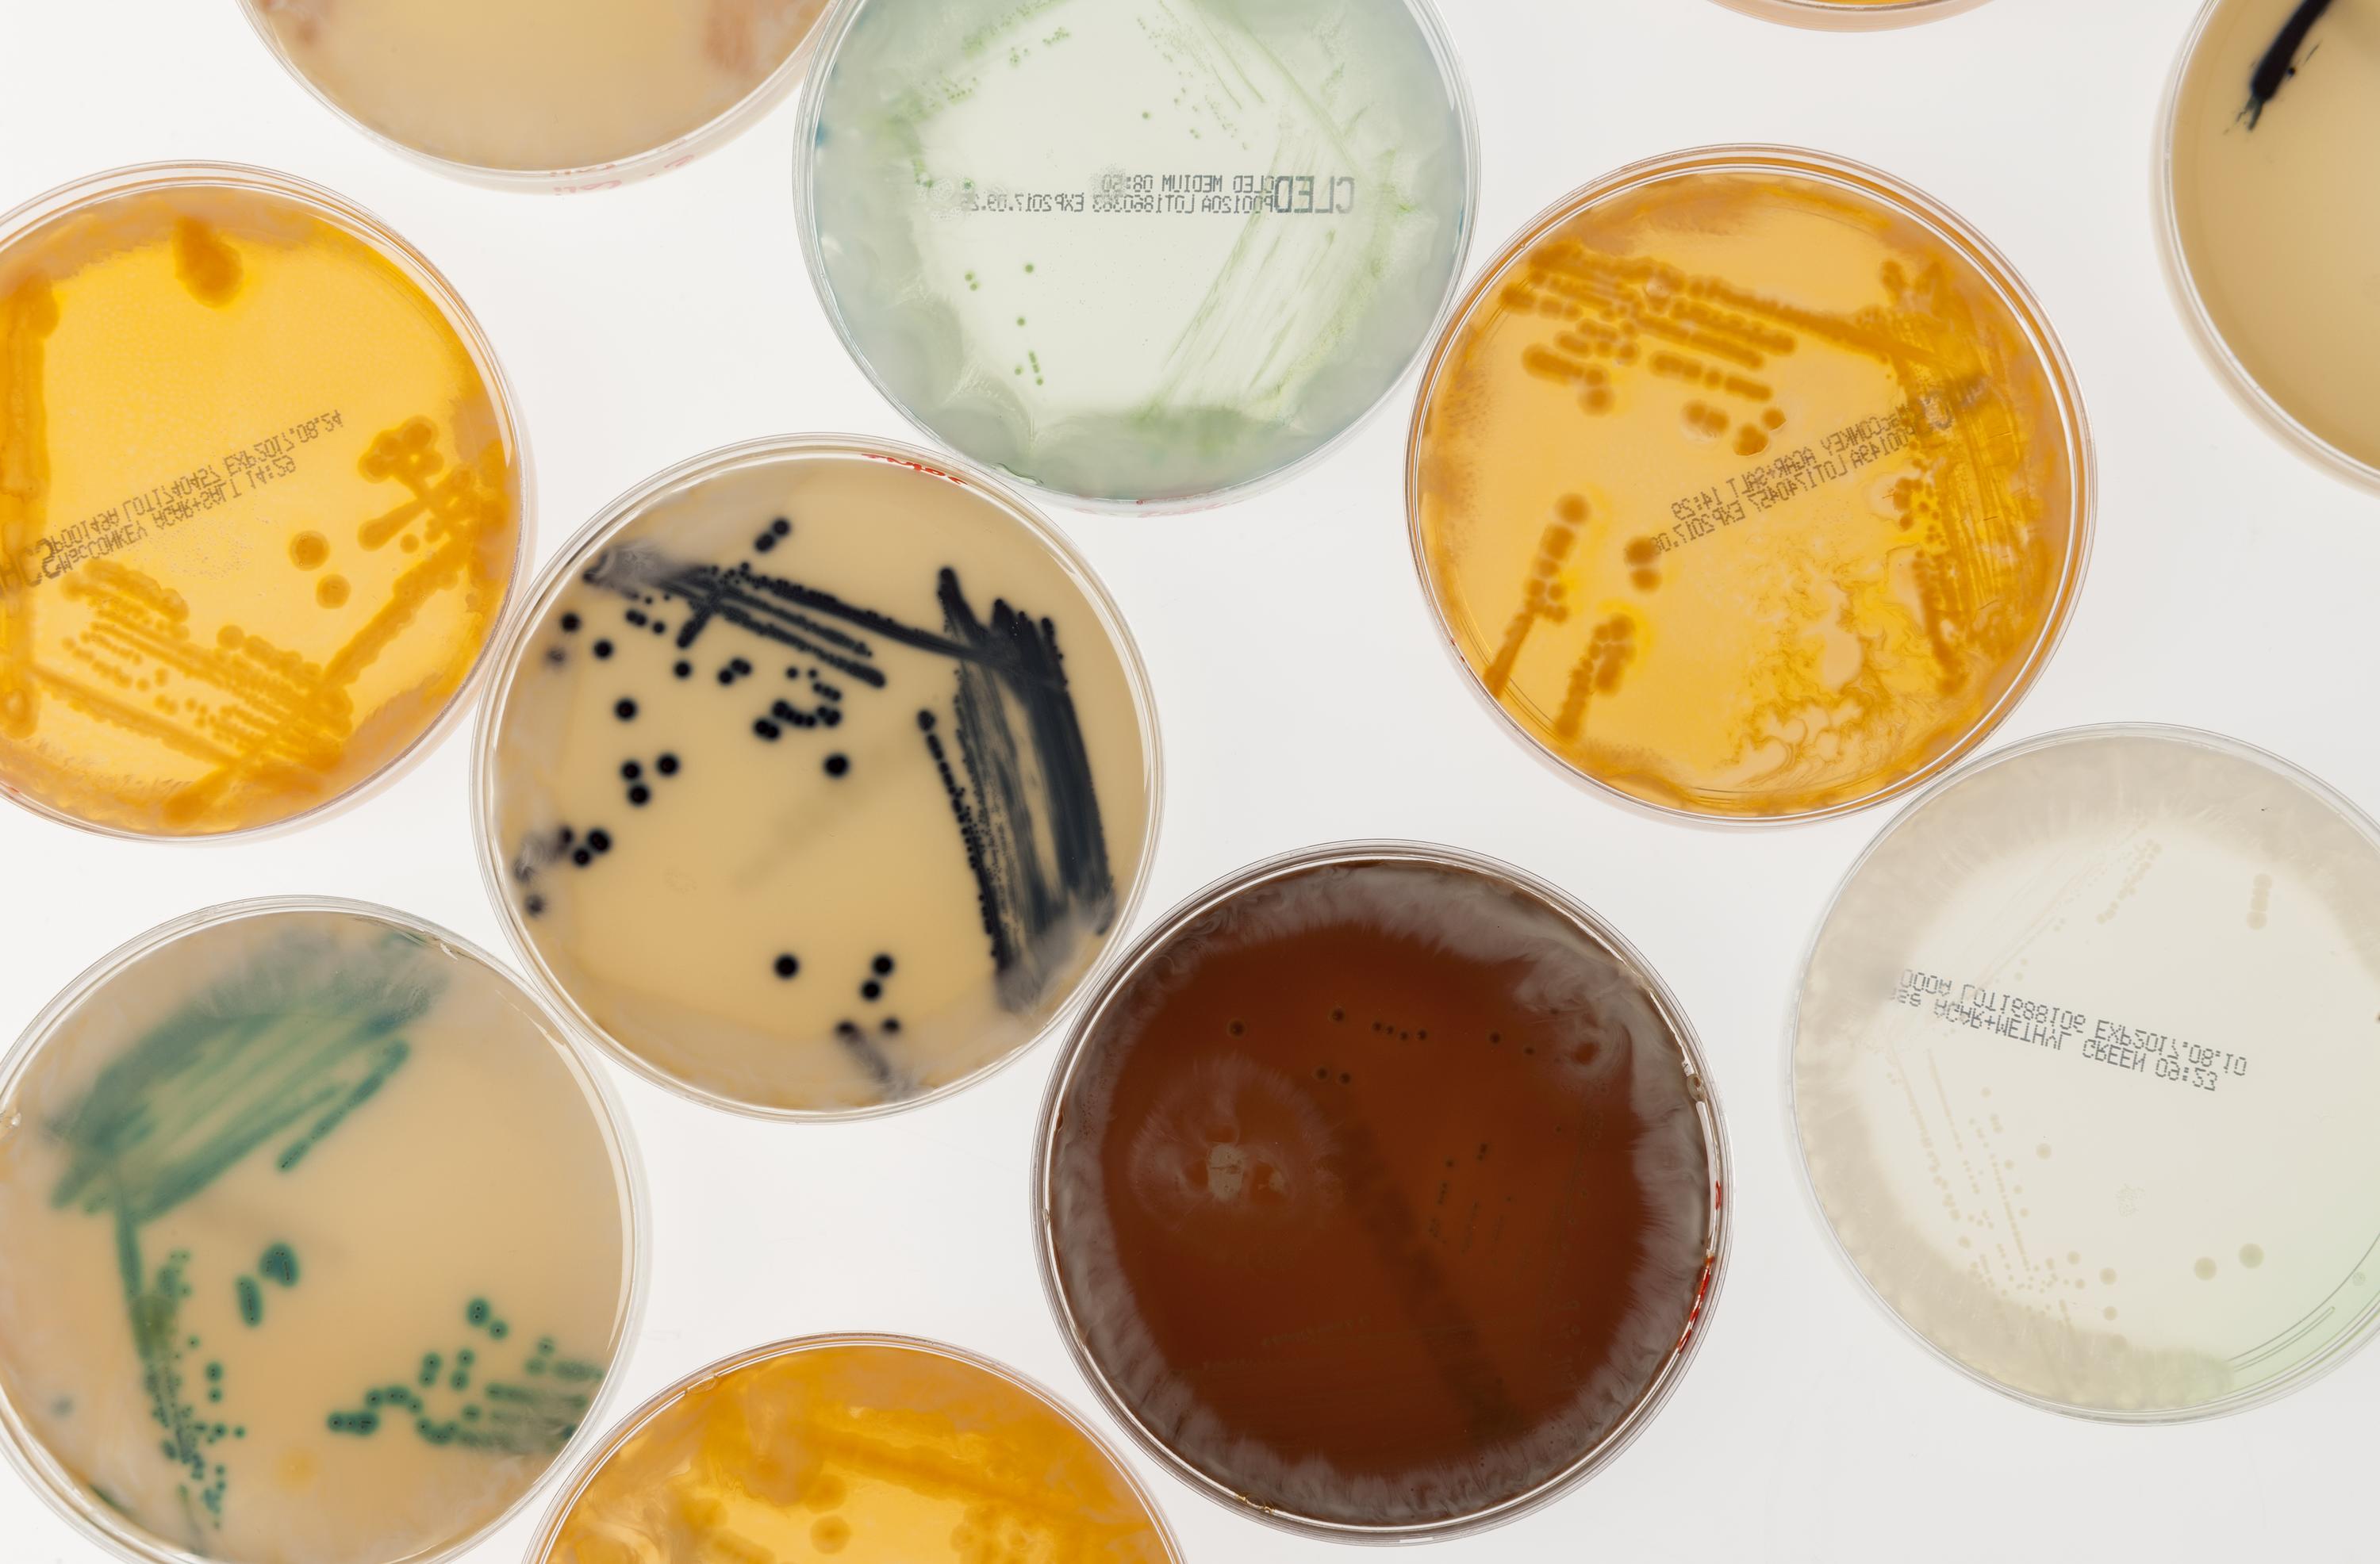 The incredible biodiversity of microbes on Earth is a testament to the complex relationships that they develop. How would a foreign bacterium interact with these complex systems?